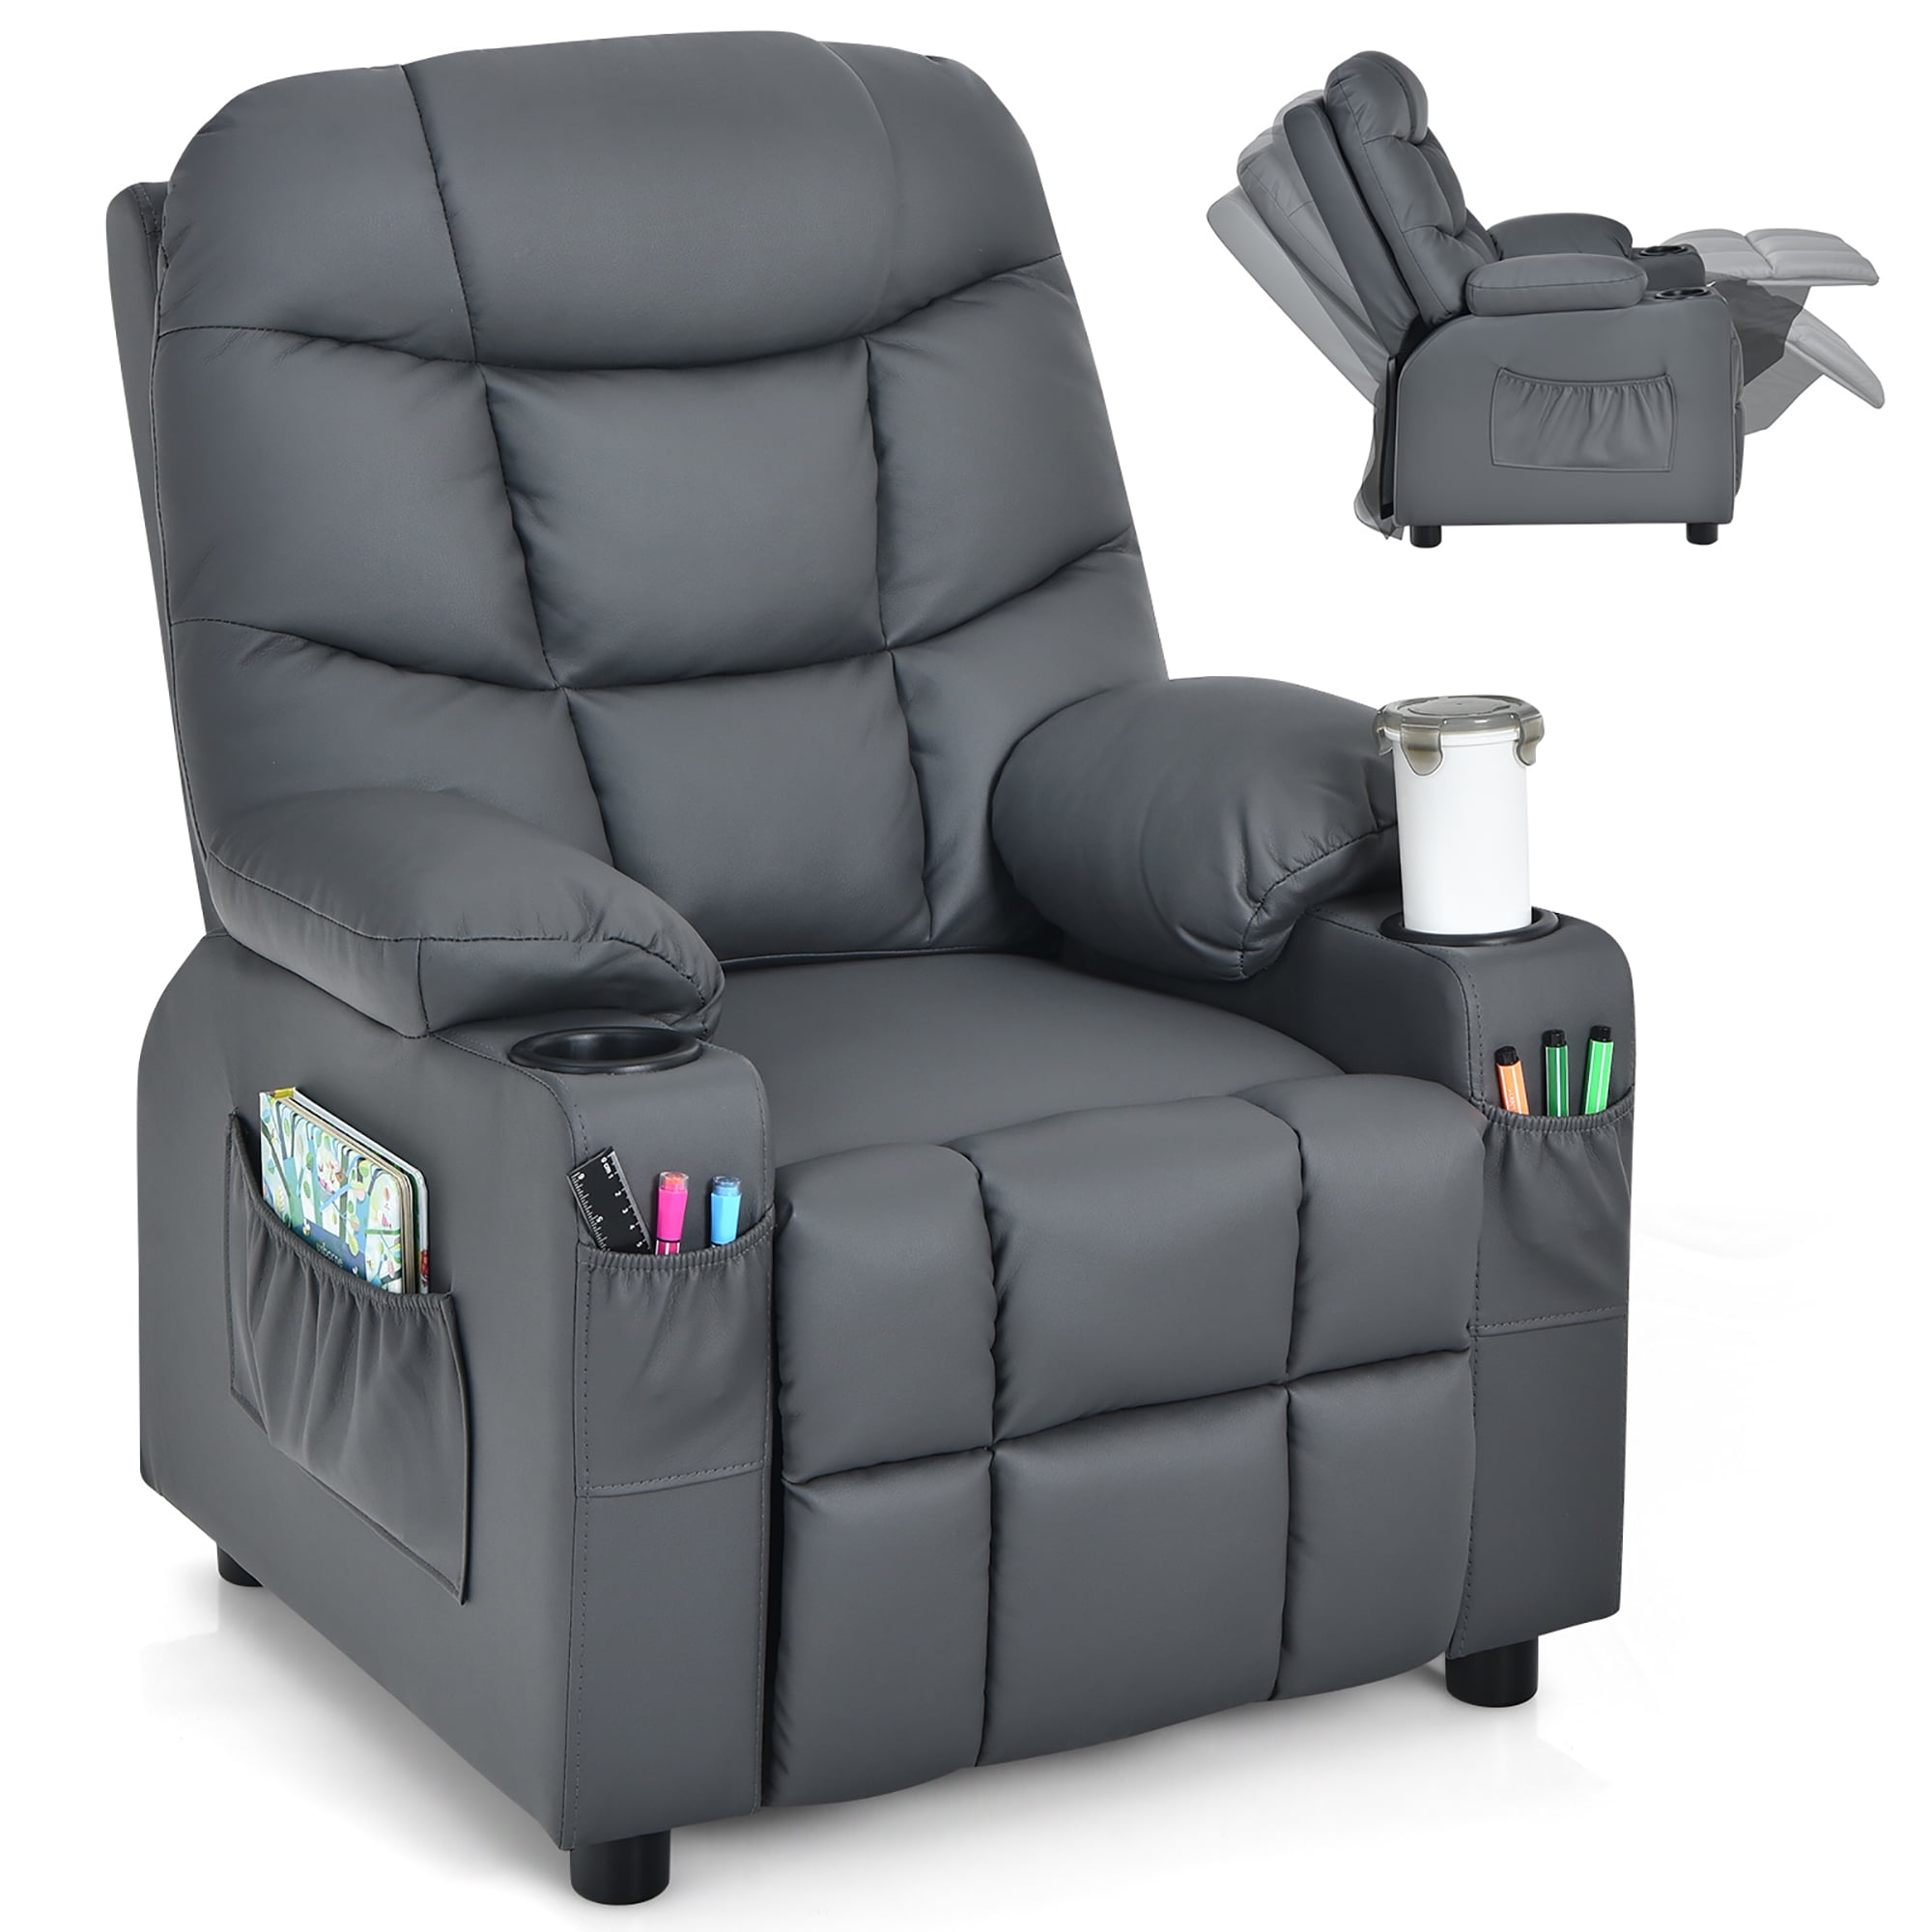 TIM-LI Kids Recliner Chair with Cup Holder Boys & Girls Youth Recliner,Black Children PU Leather Padded Backrest Armchair 